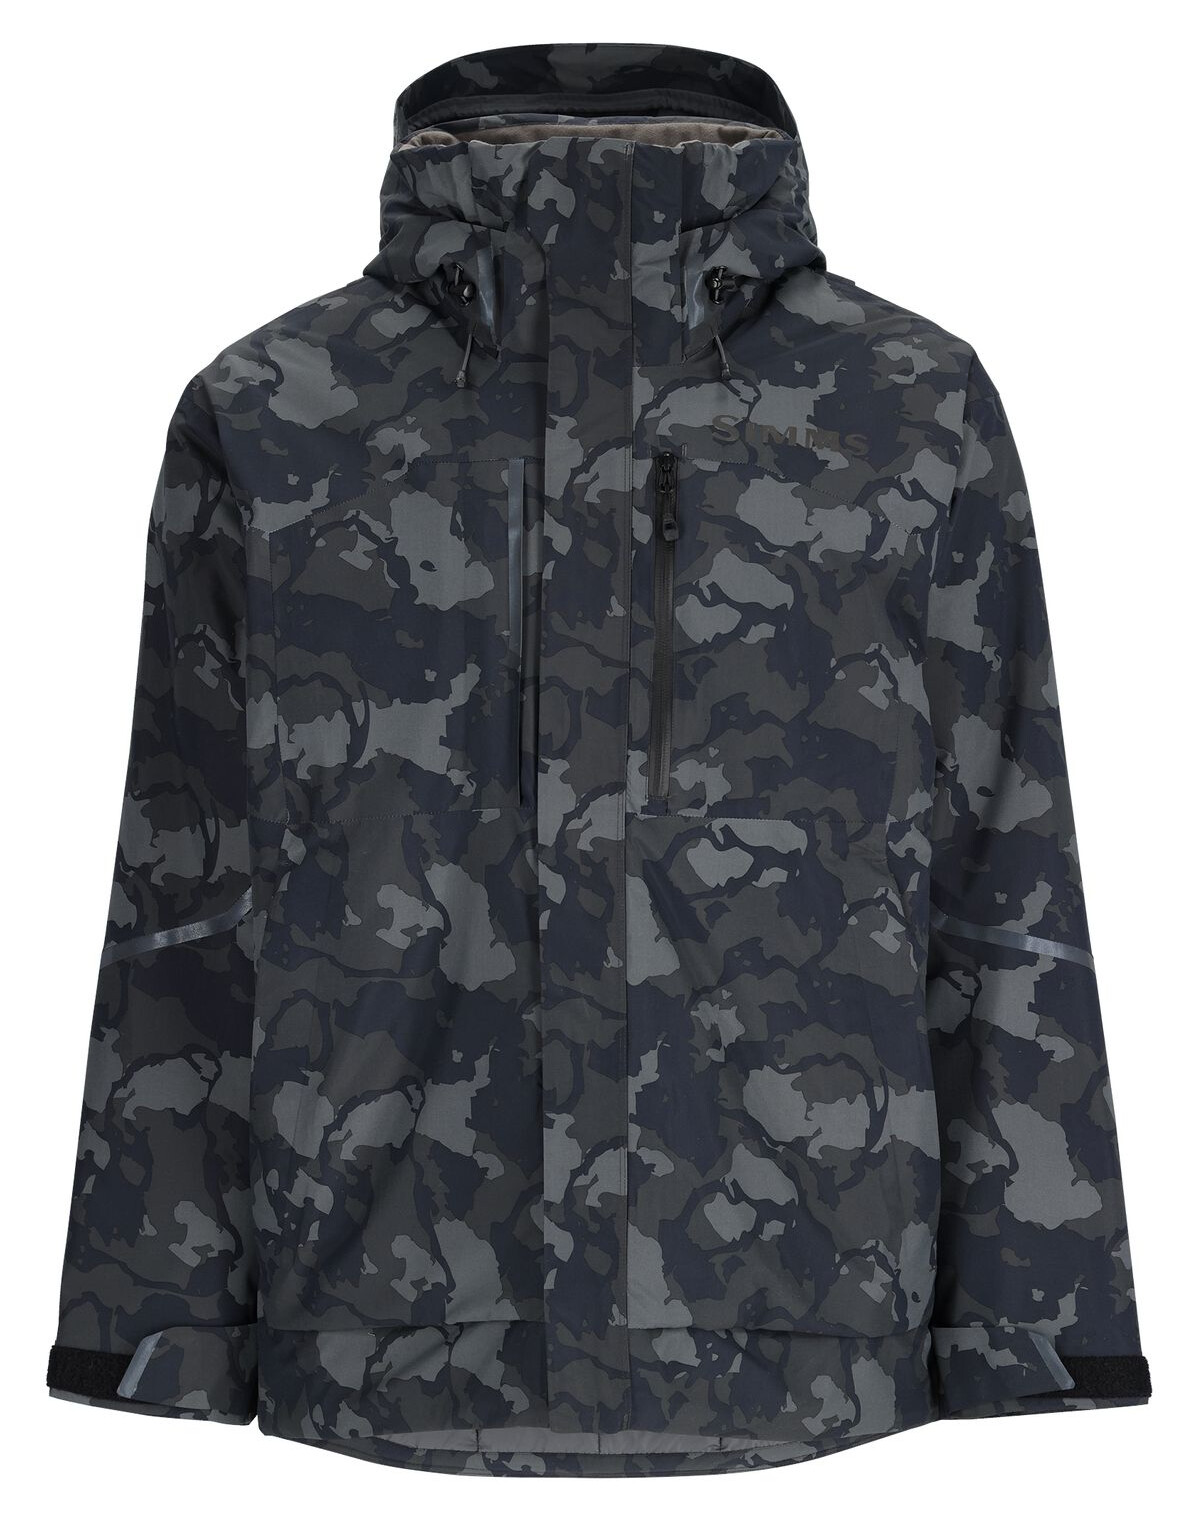 Fishing Jacket Simms Challenger Insulated Jacket Regiment Camo Carbon ...